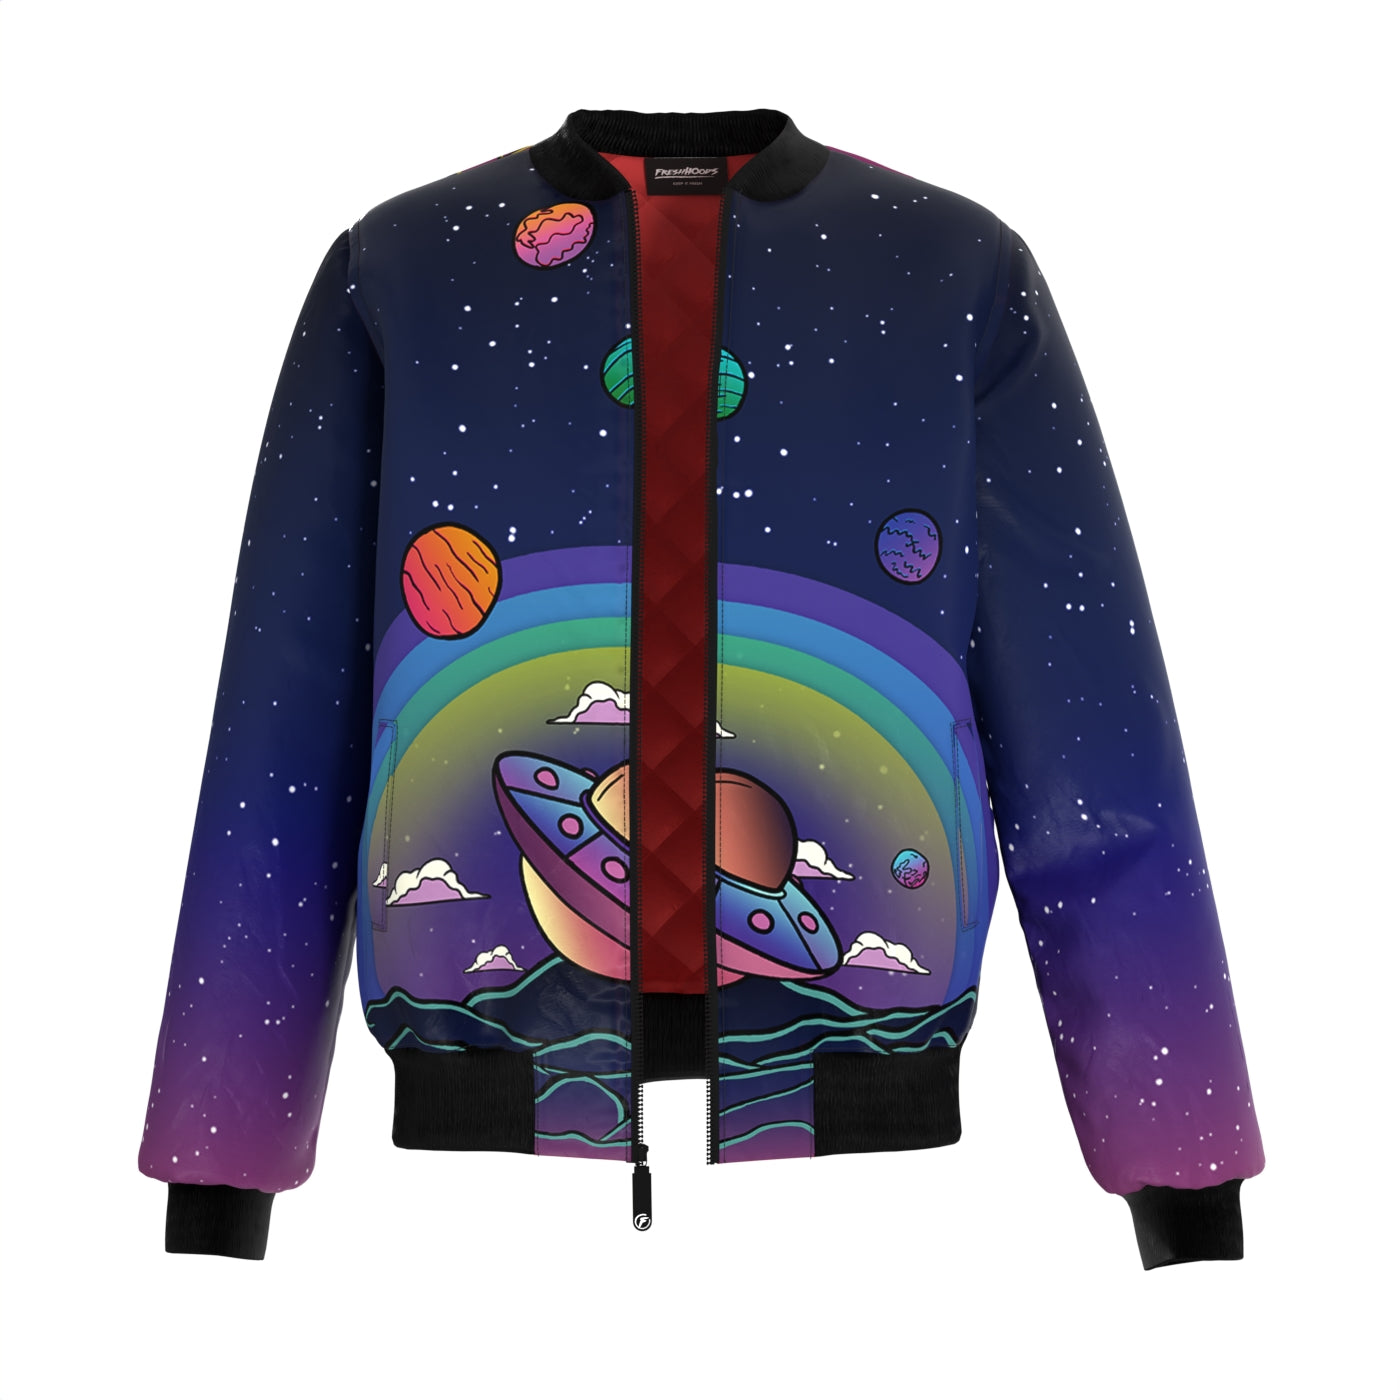 Above All Bomber Jacket